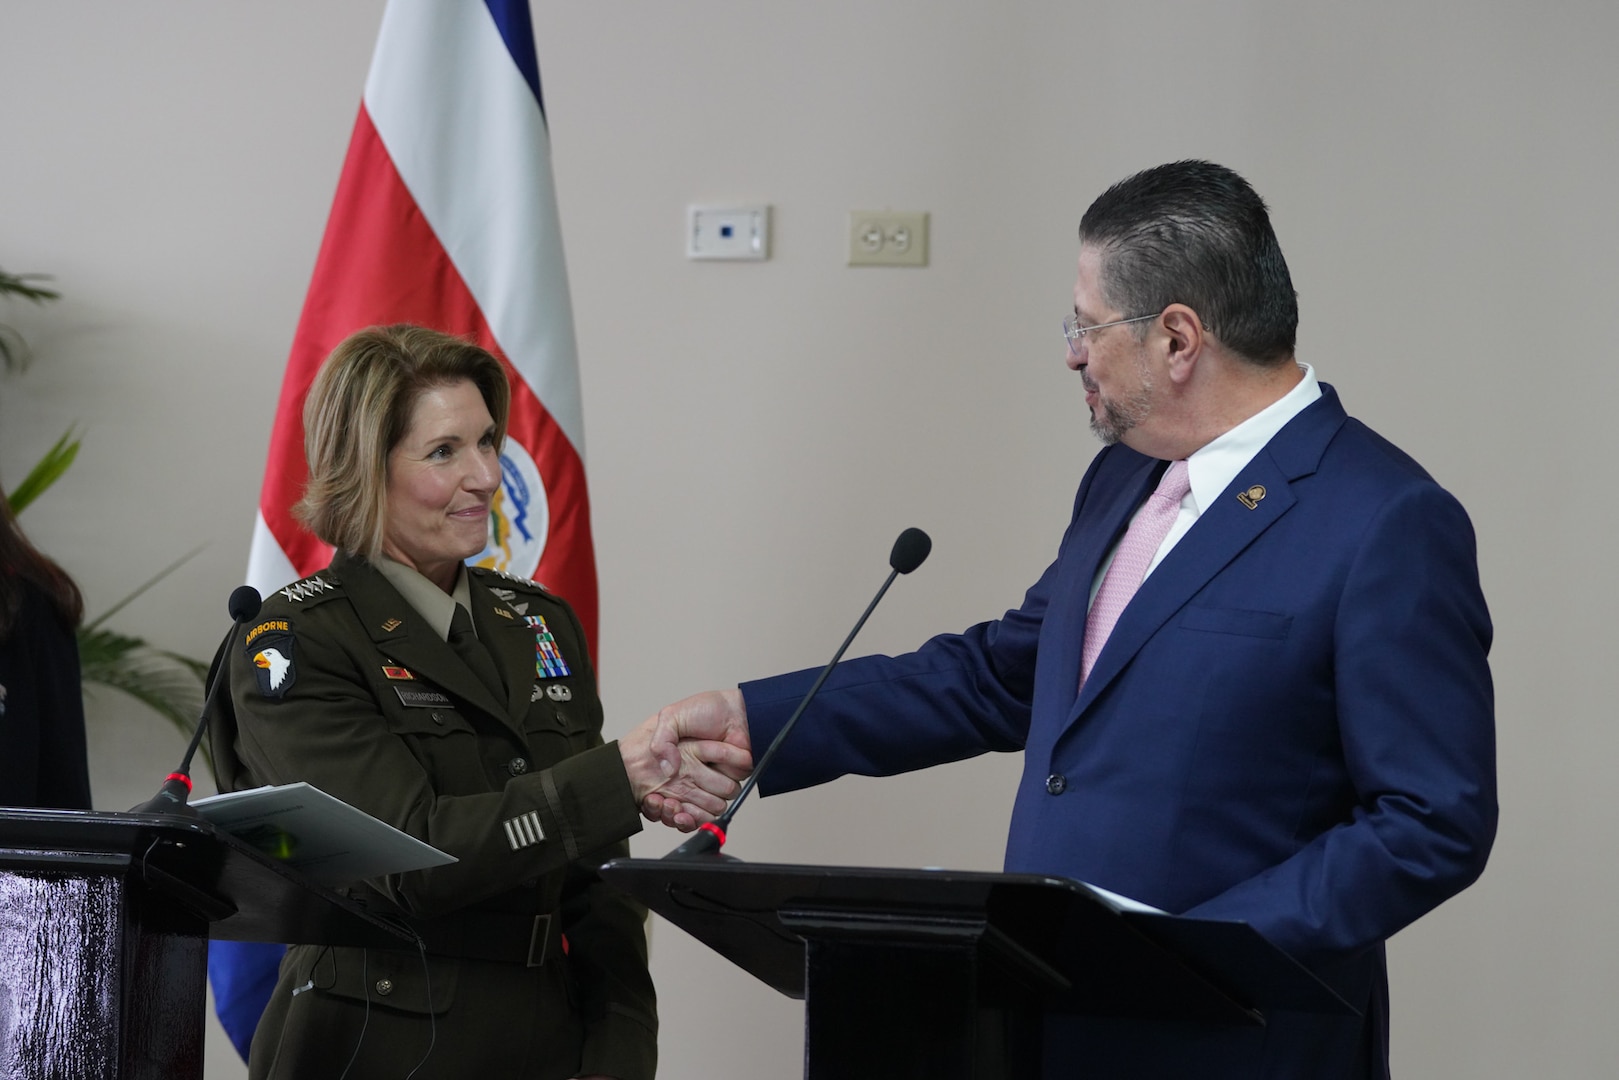 U.S. Army Gen. Laura Richardson, the commander of U.S. Southern Command, shakes hands with Costa Rican President Rodrigo Chaves Robles.